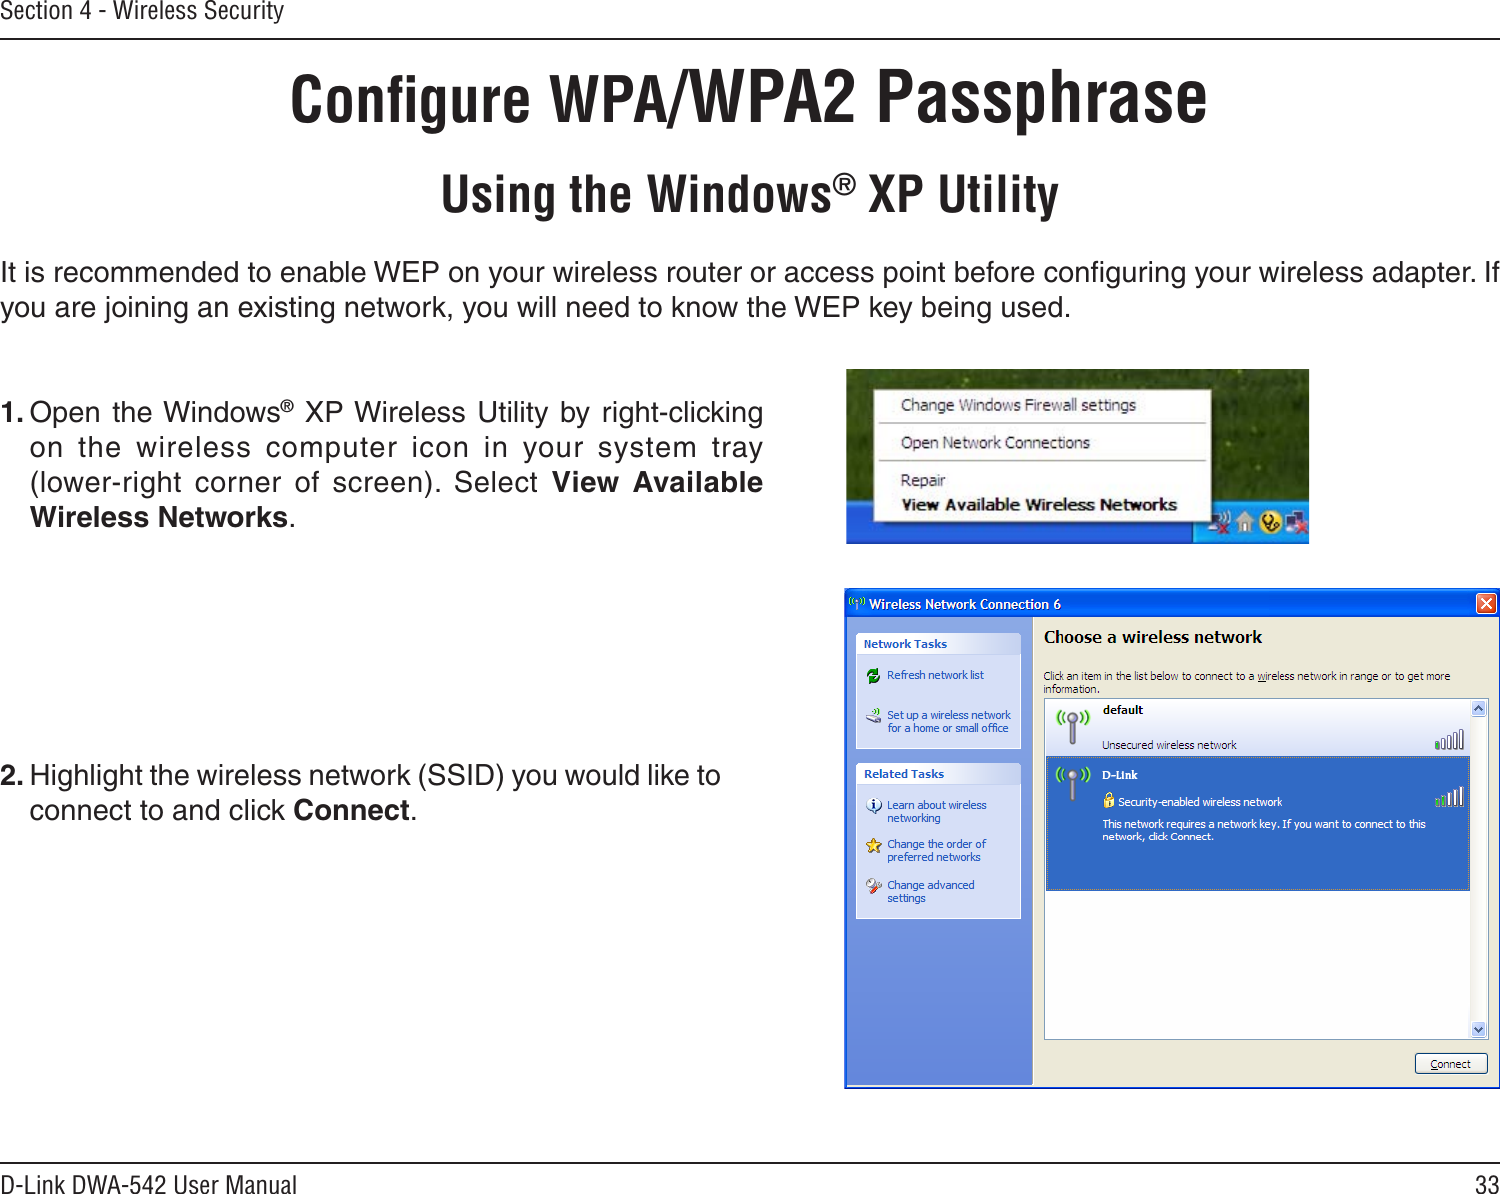 33D-Link DWA-542 User ManualSection 4 - Wireless SecurityConﬁgure WPA/WPA2 PassphraseUsing the Windows® XP UtilityIt is recommended to enable WEP on your wireless router or access point before conﬁguring your wireless adapter. If you are joining an existing network, you will need to know the WEP key being used.2. Highlight the wireless network (SSID) you would like to connect to and click Connect.1. Open the Windows® XP Wireless Utility by  right-clicking on  the  wireless  computer  icon  in  your  system  tray  (lower-right  corner  of  screen).  Select  View  Available Wireless Networks. 